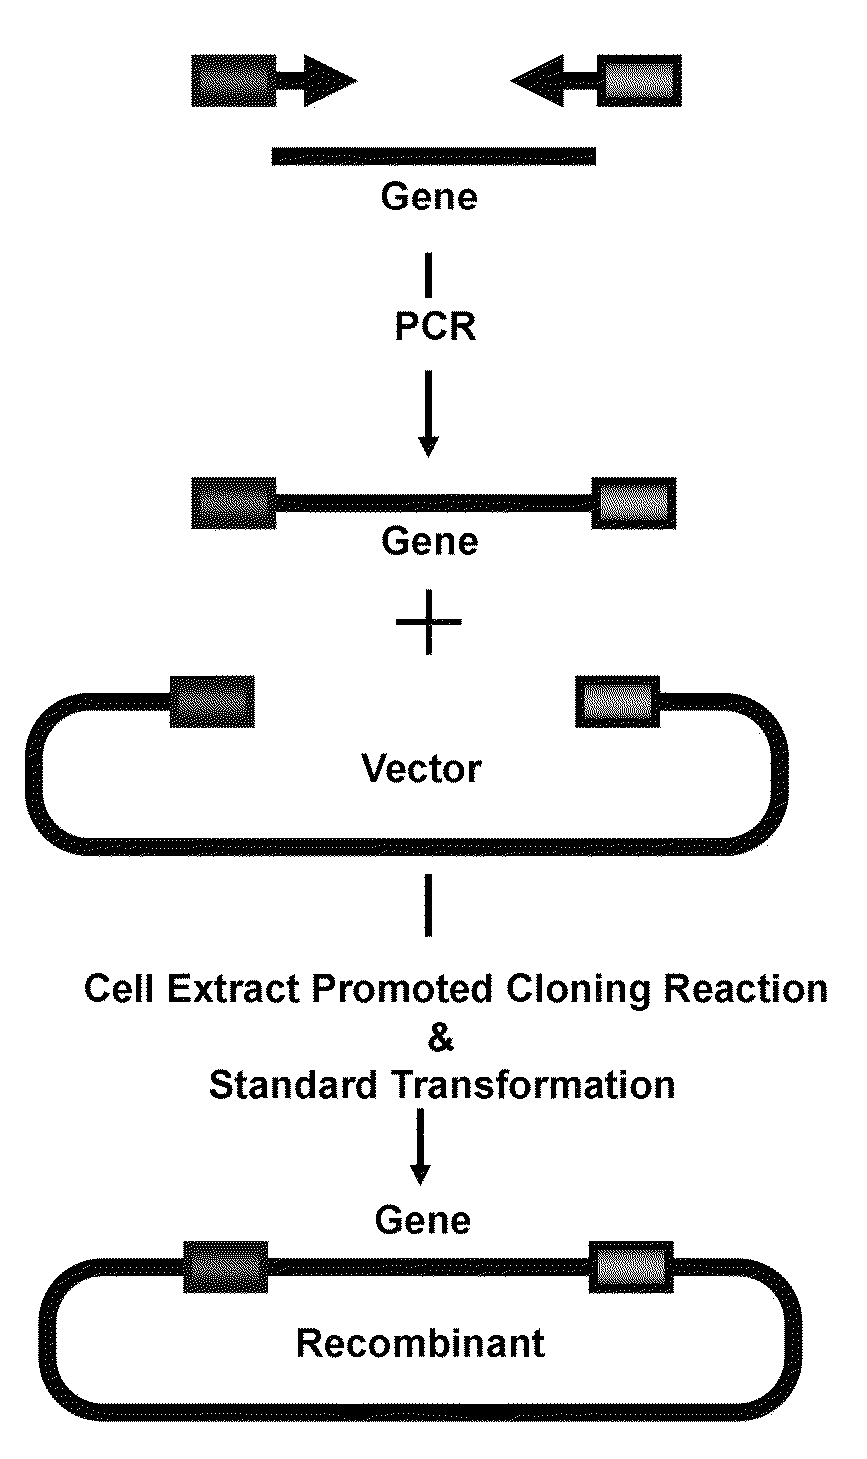 Cell extract promoted cloning